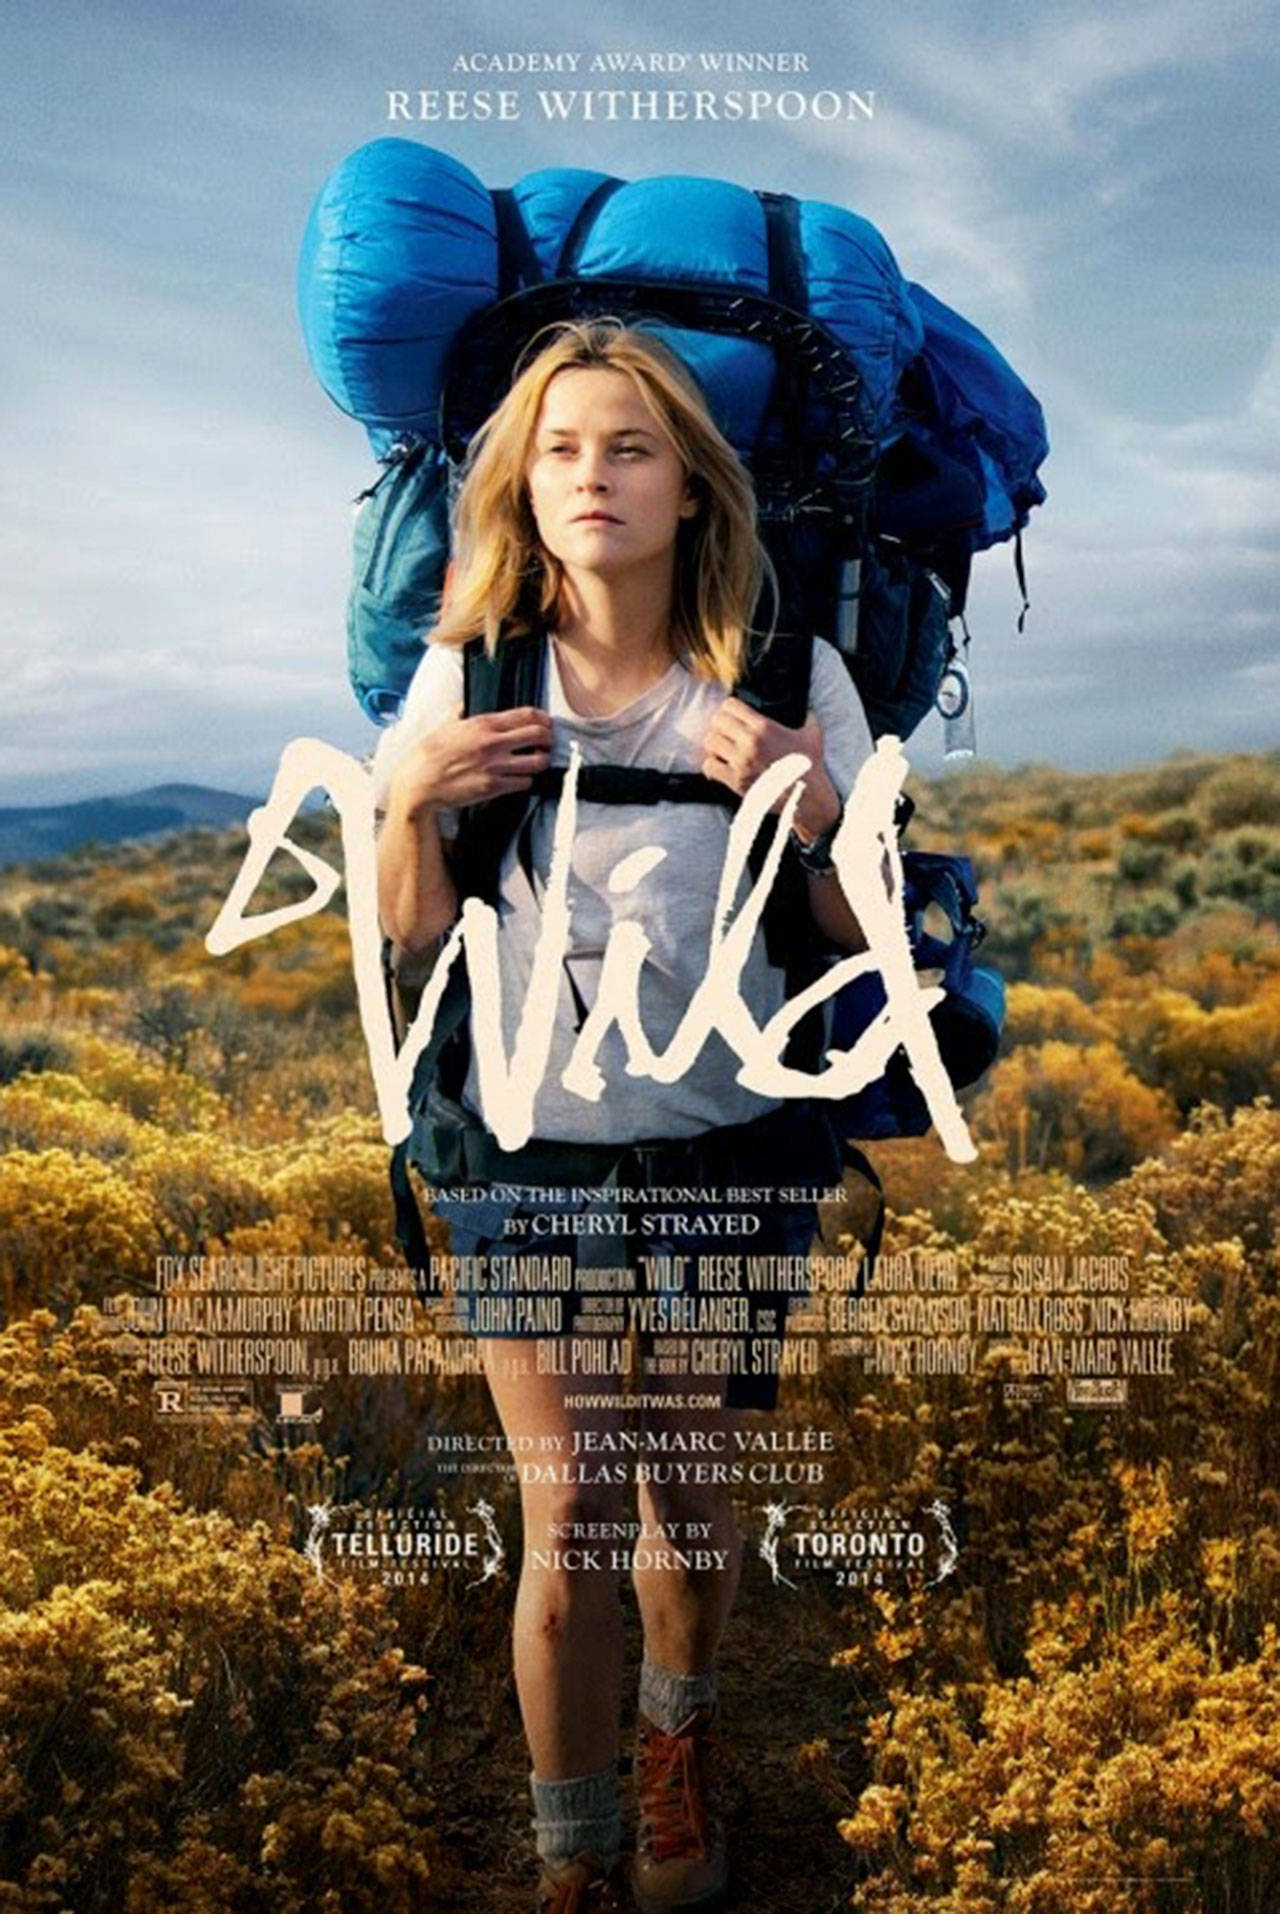 Image courtesy of Fox Searchlight Pictures | “Wild” (2014)